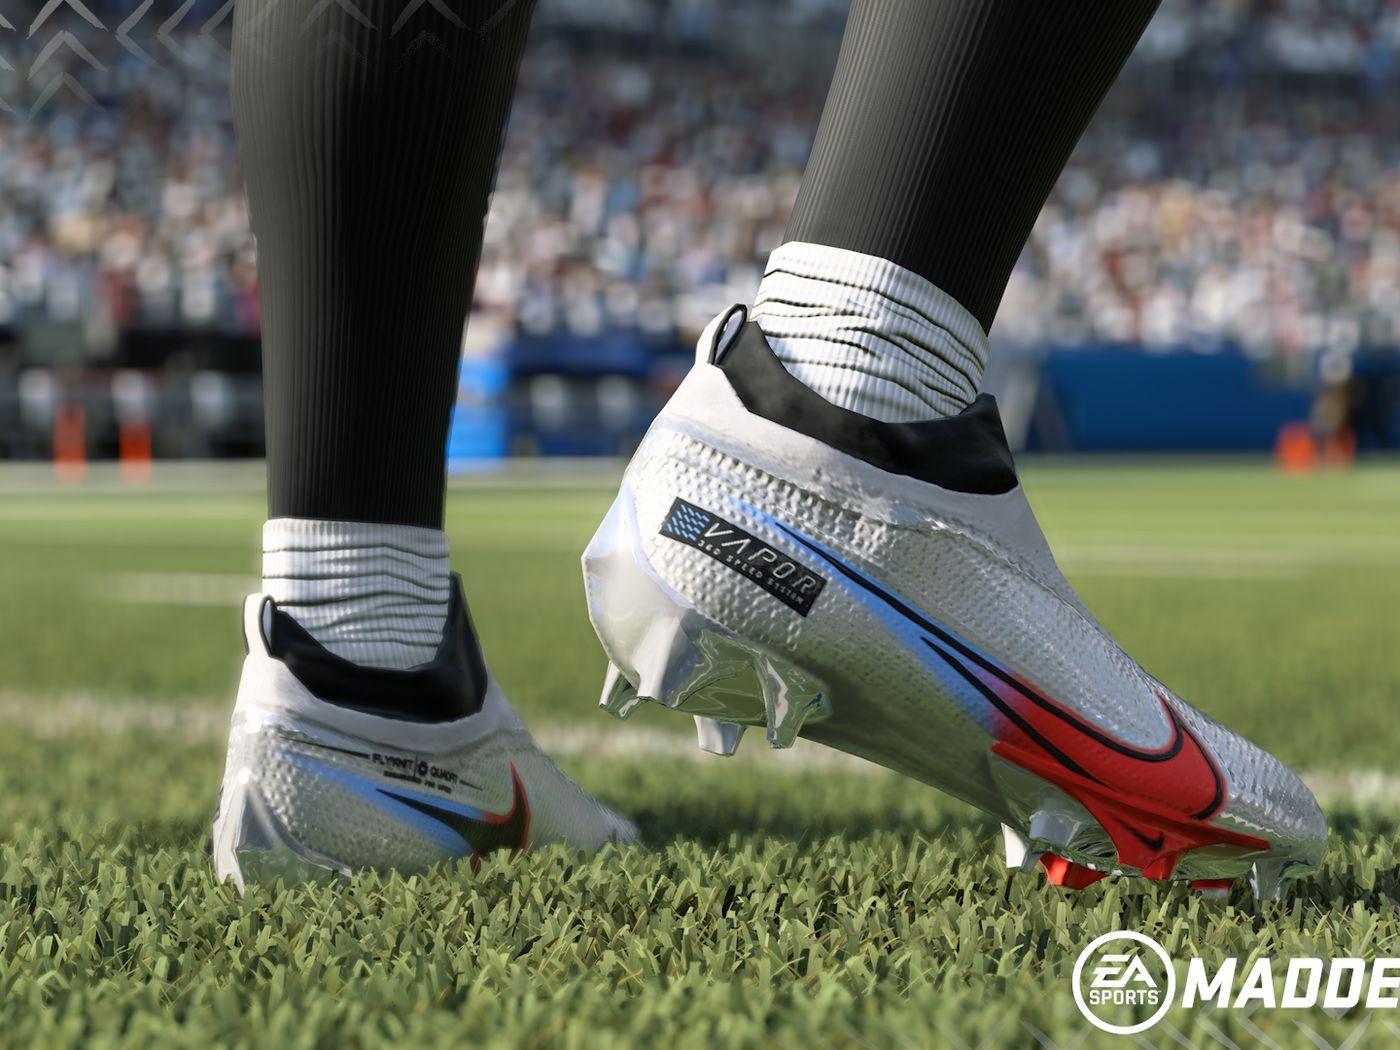 Madden 20 is adding a Nike cleat that makes players better